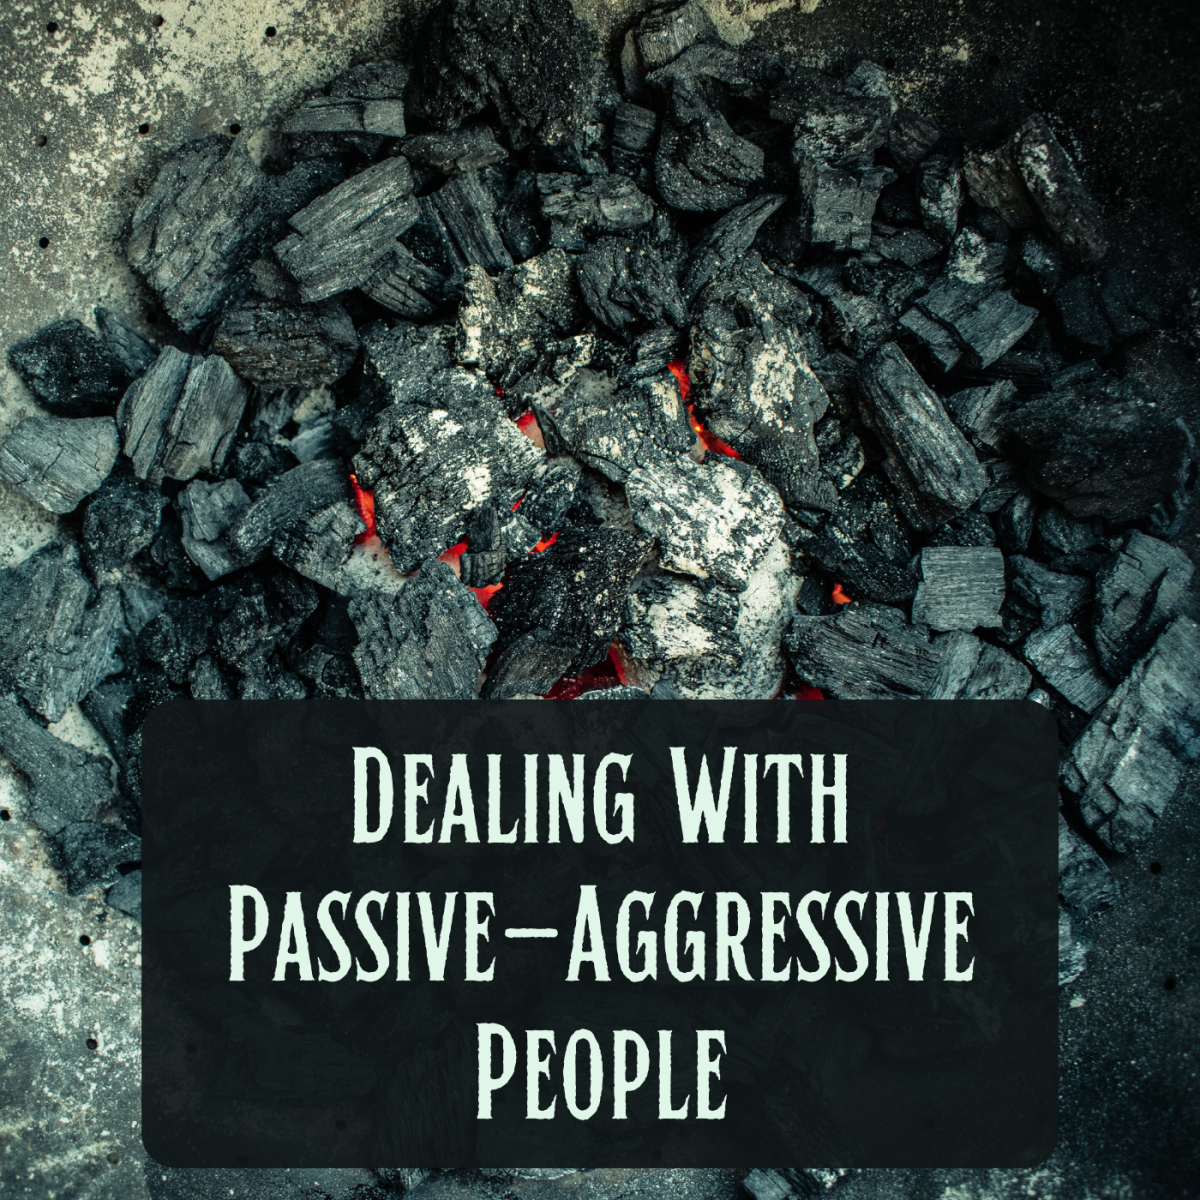 Got a passive-aggressive person in your life? Get advice on dealing with their behavior.